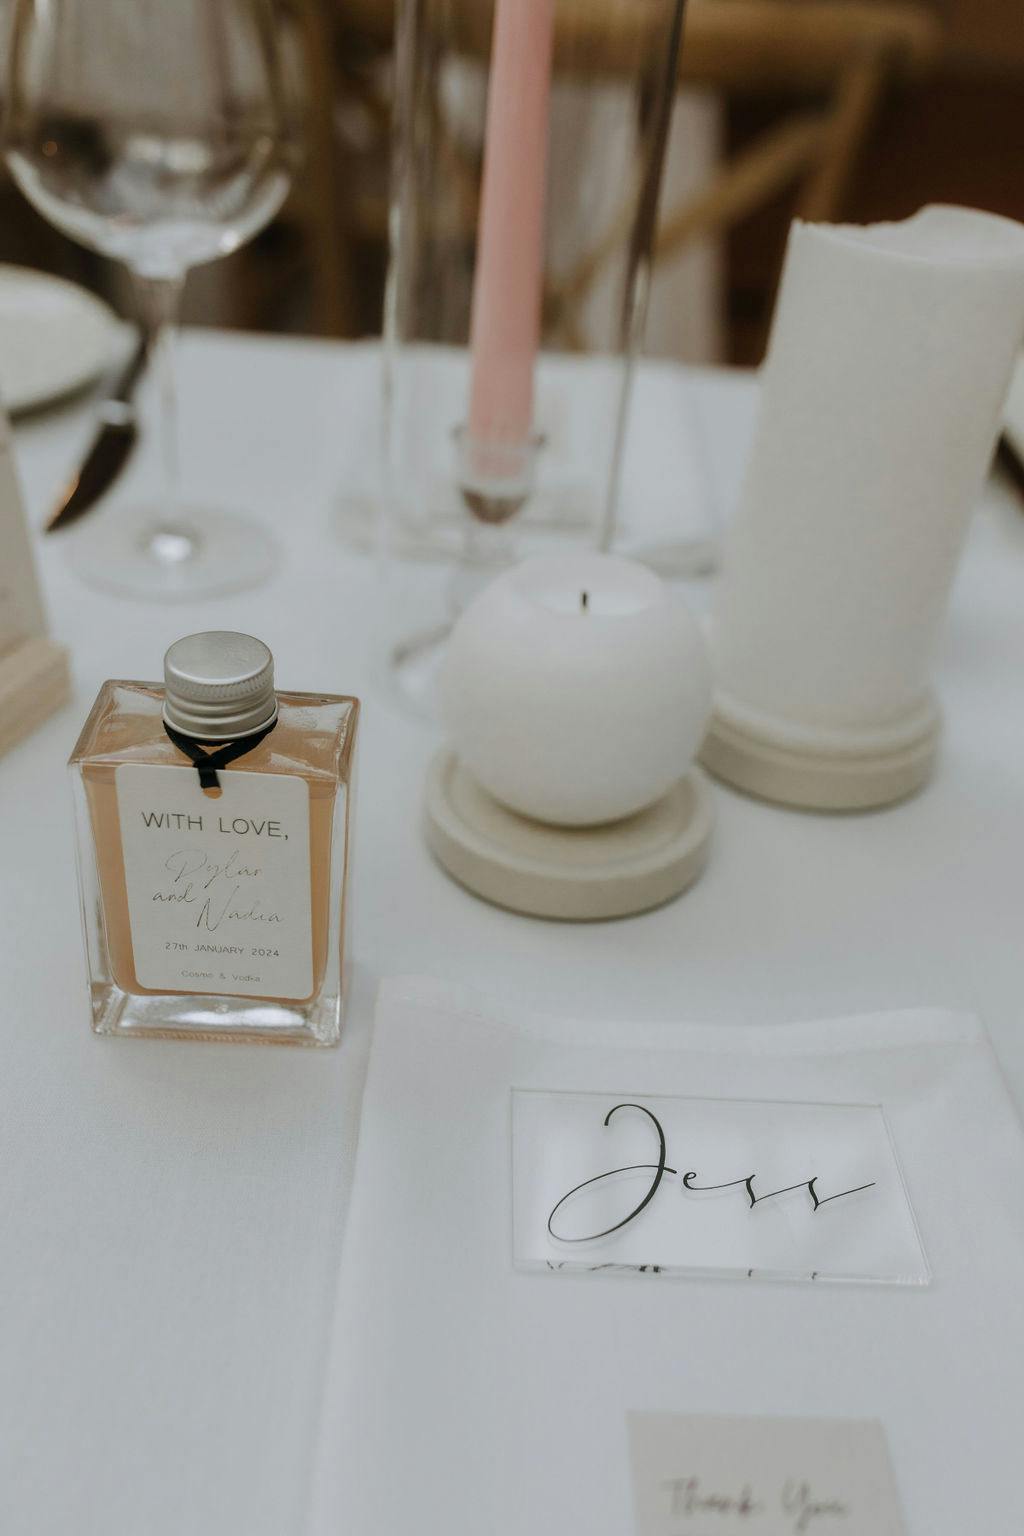 Close-up of a wedding table setting featuring a small bottle labeled "With Love..." a candle, a tall pink taper candle, glassware, and a napkin with a name card that reads "Jess." The setup is elegant with neutral tones and a minimalist aesthetic.